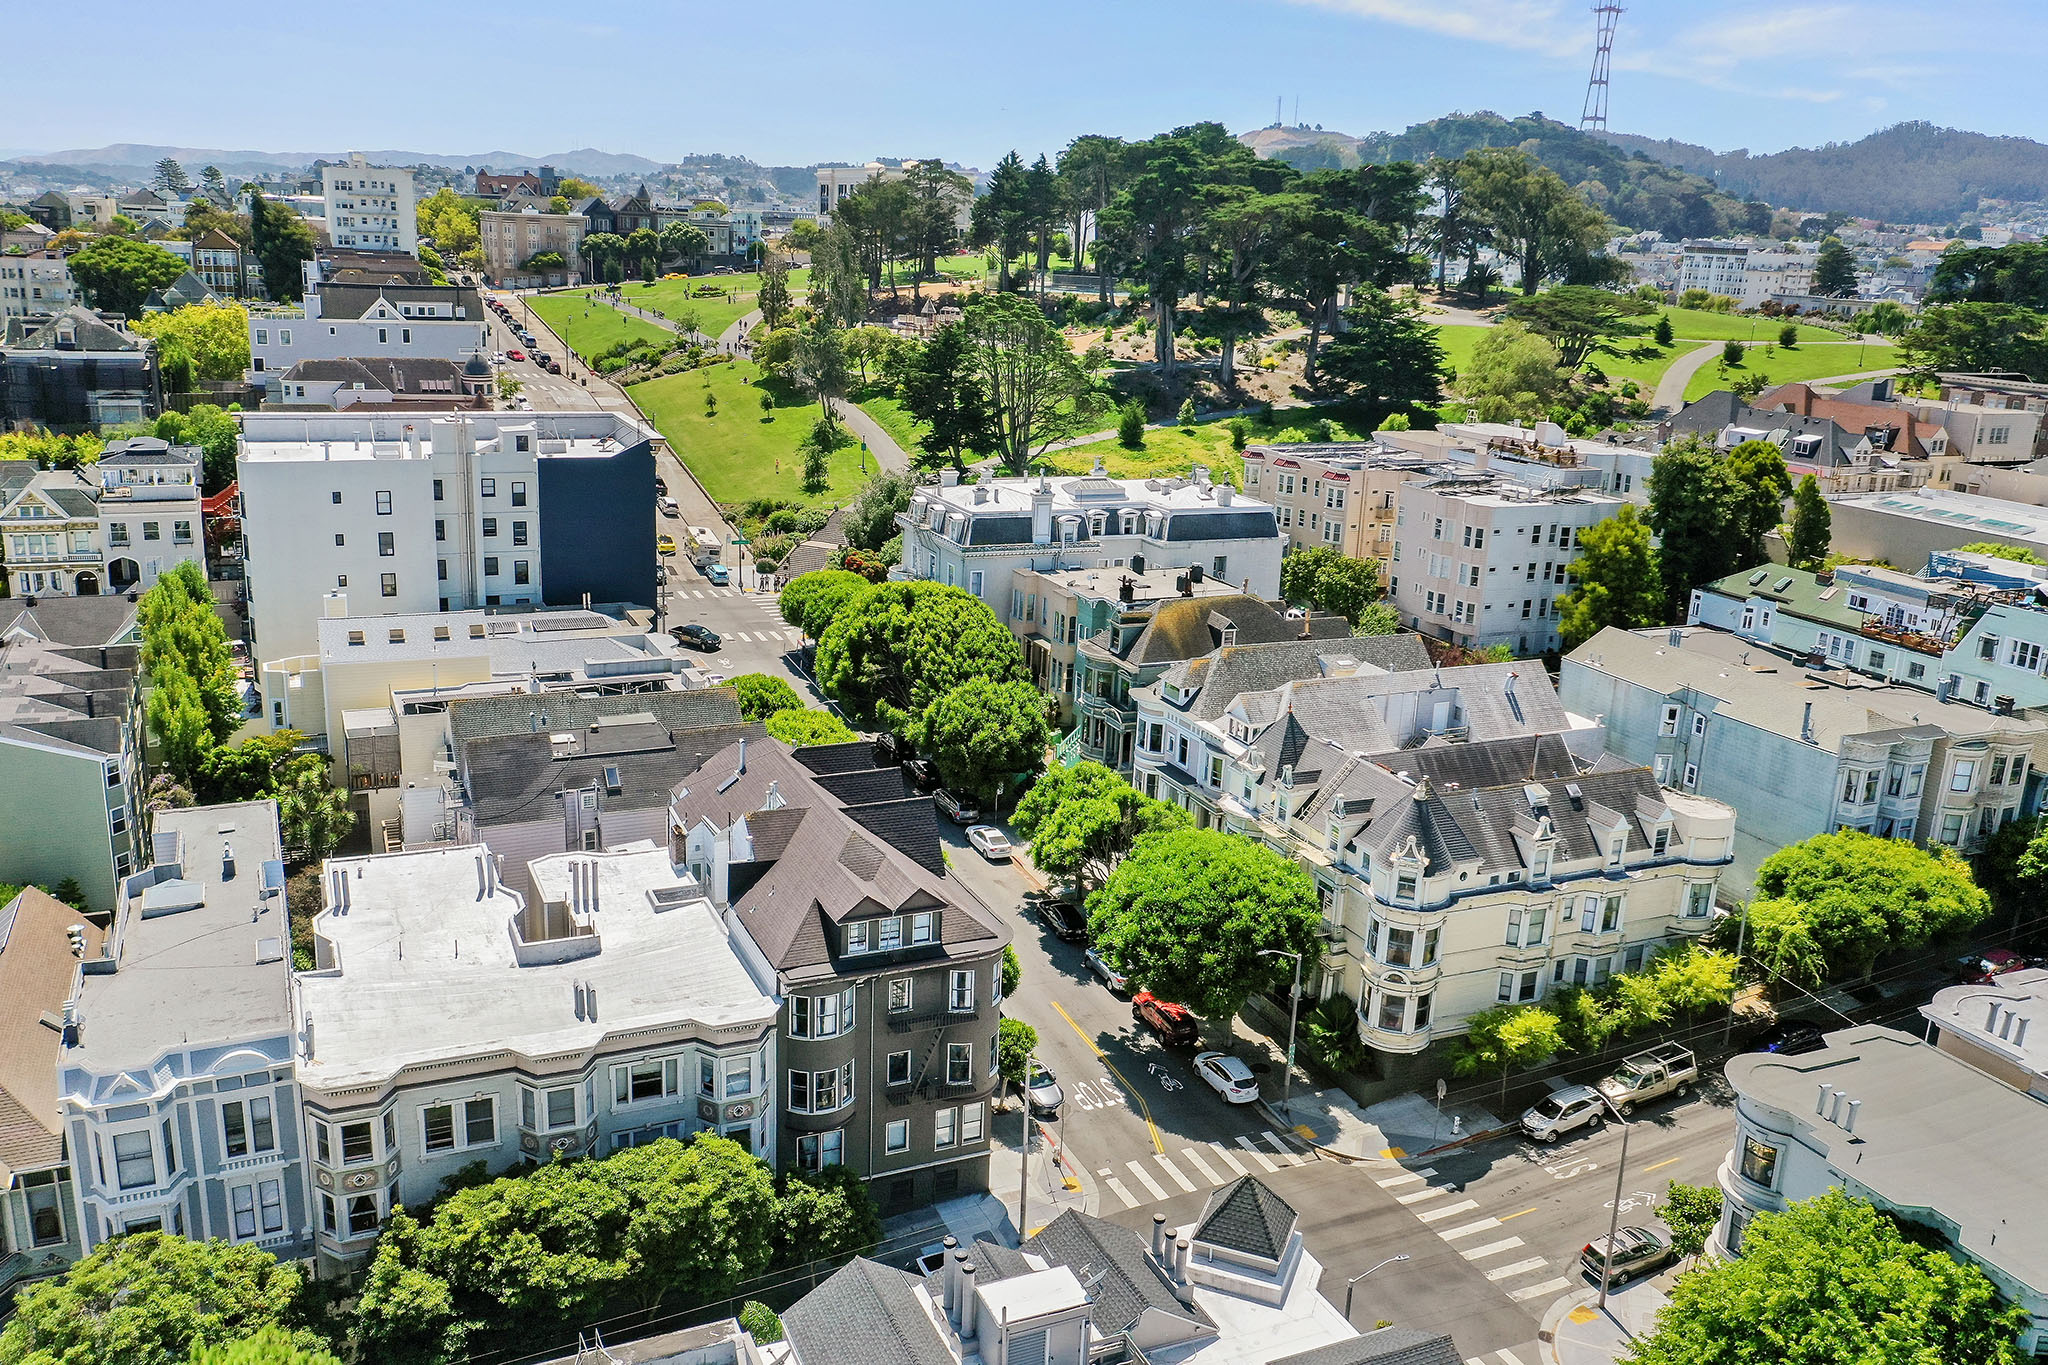 Property Photo: Aerial view from 1271 McAllister Street, showing Sutro Tower in the distance